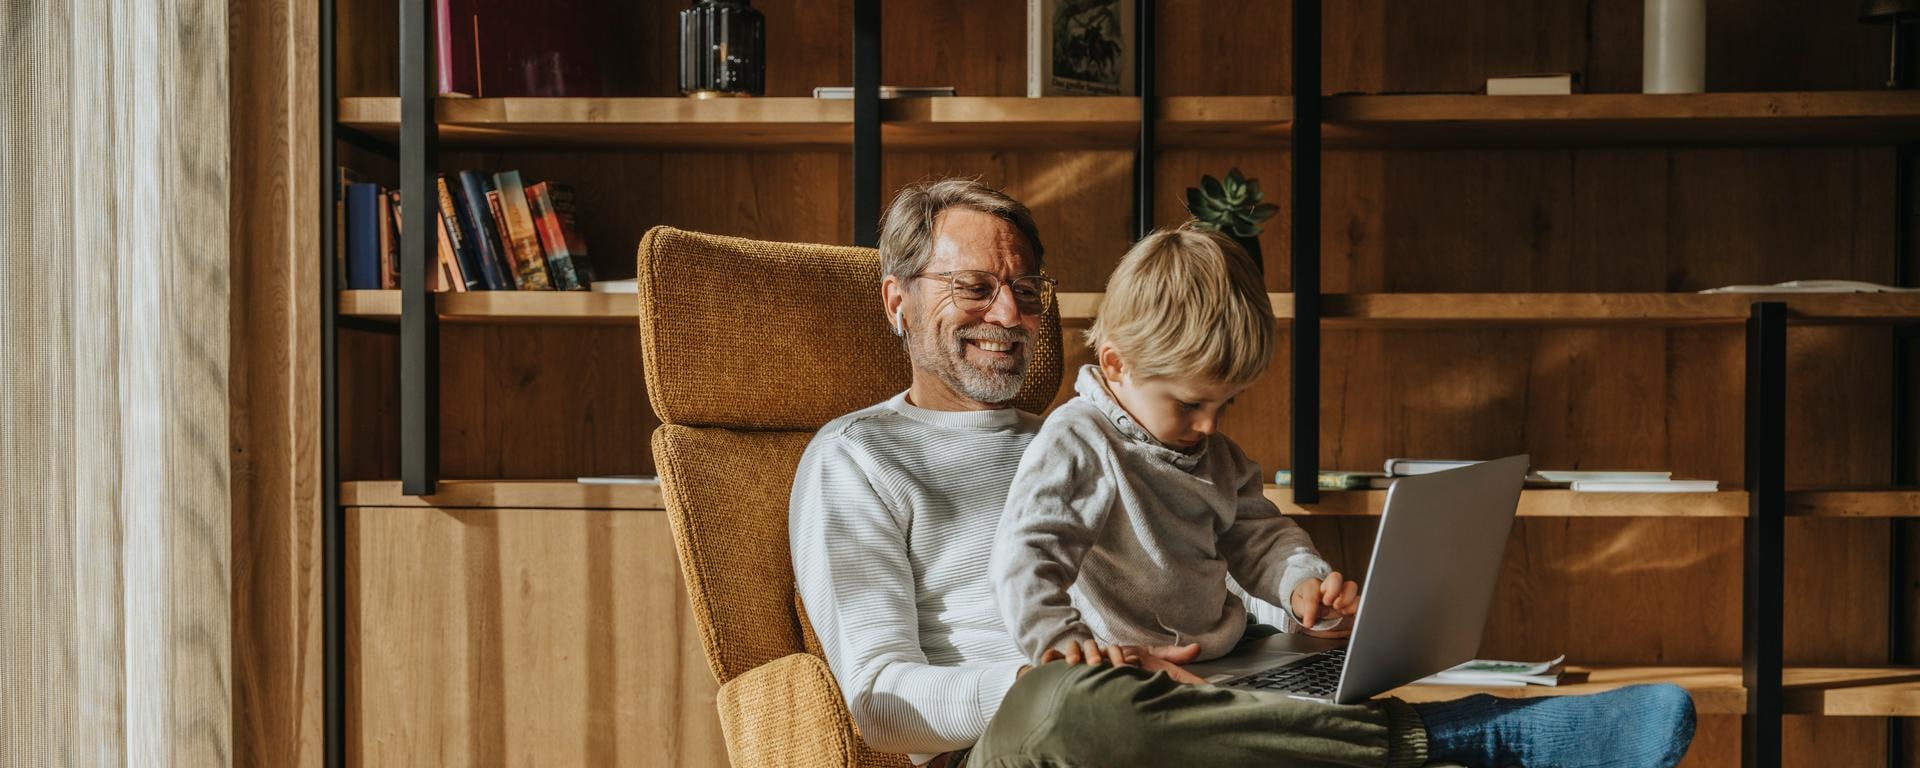 Life insurance at Vontobel - father with his son and computer on his lap in a cozy living room